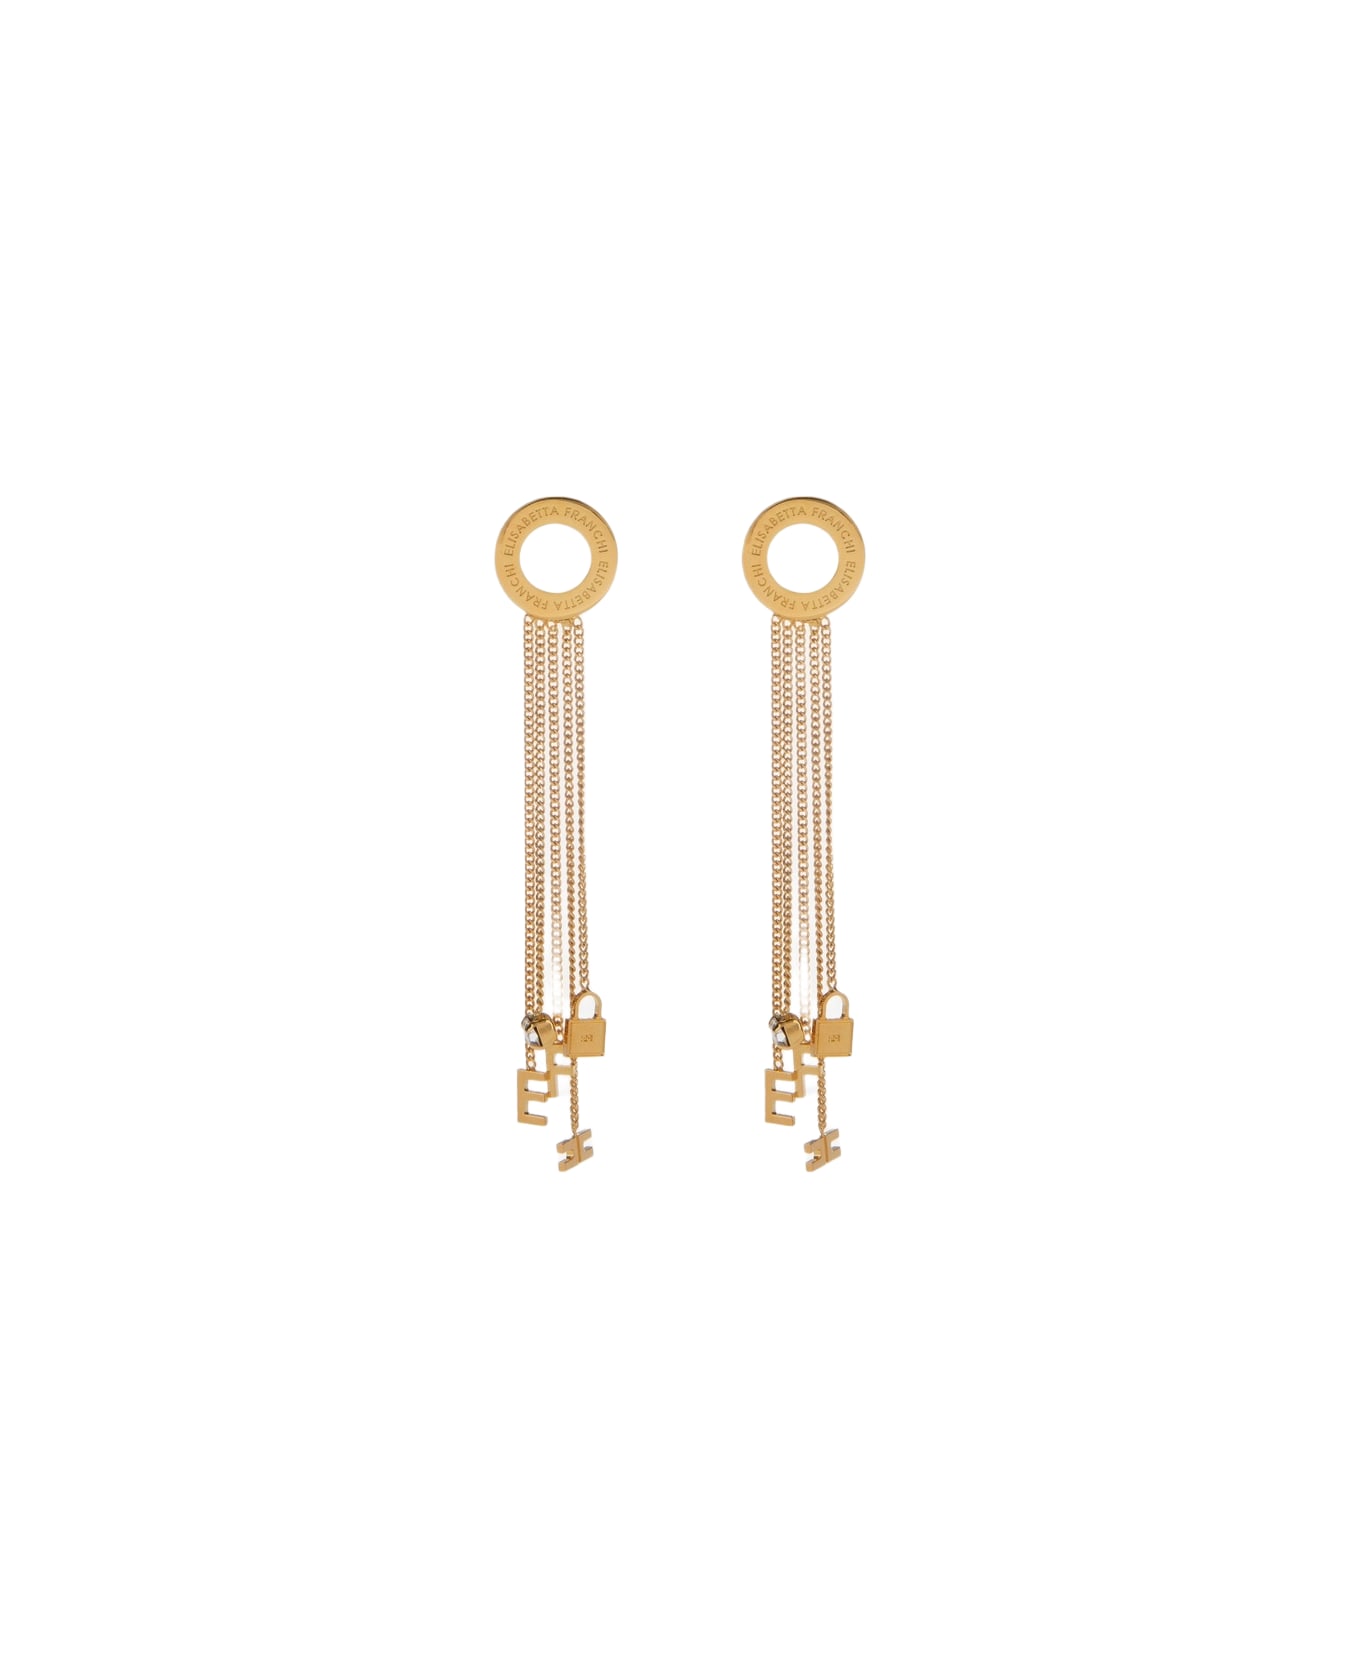 Elisabetta Franchi Earrings With Hanging Tassels And Charms - GOLD